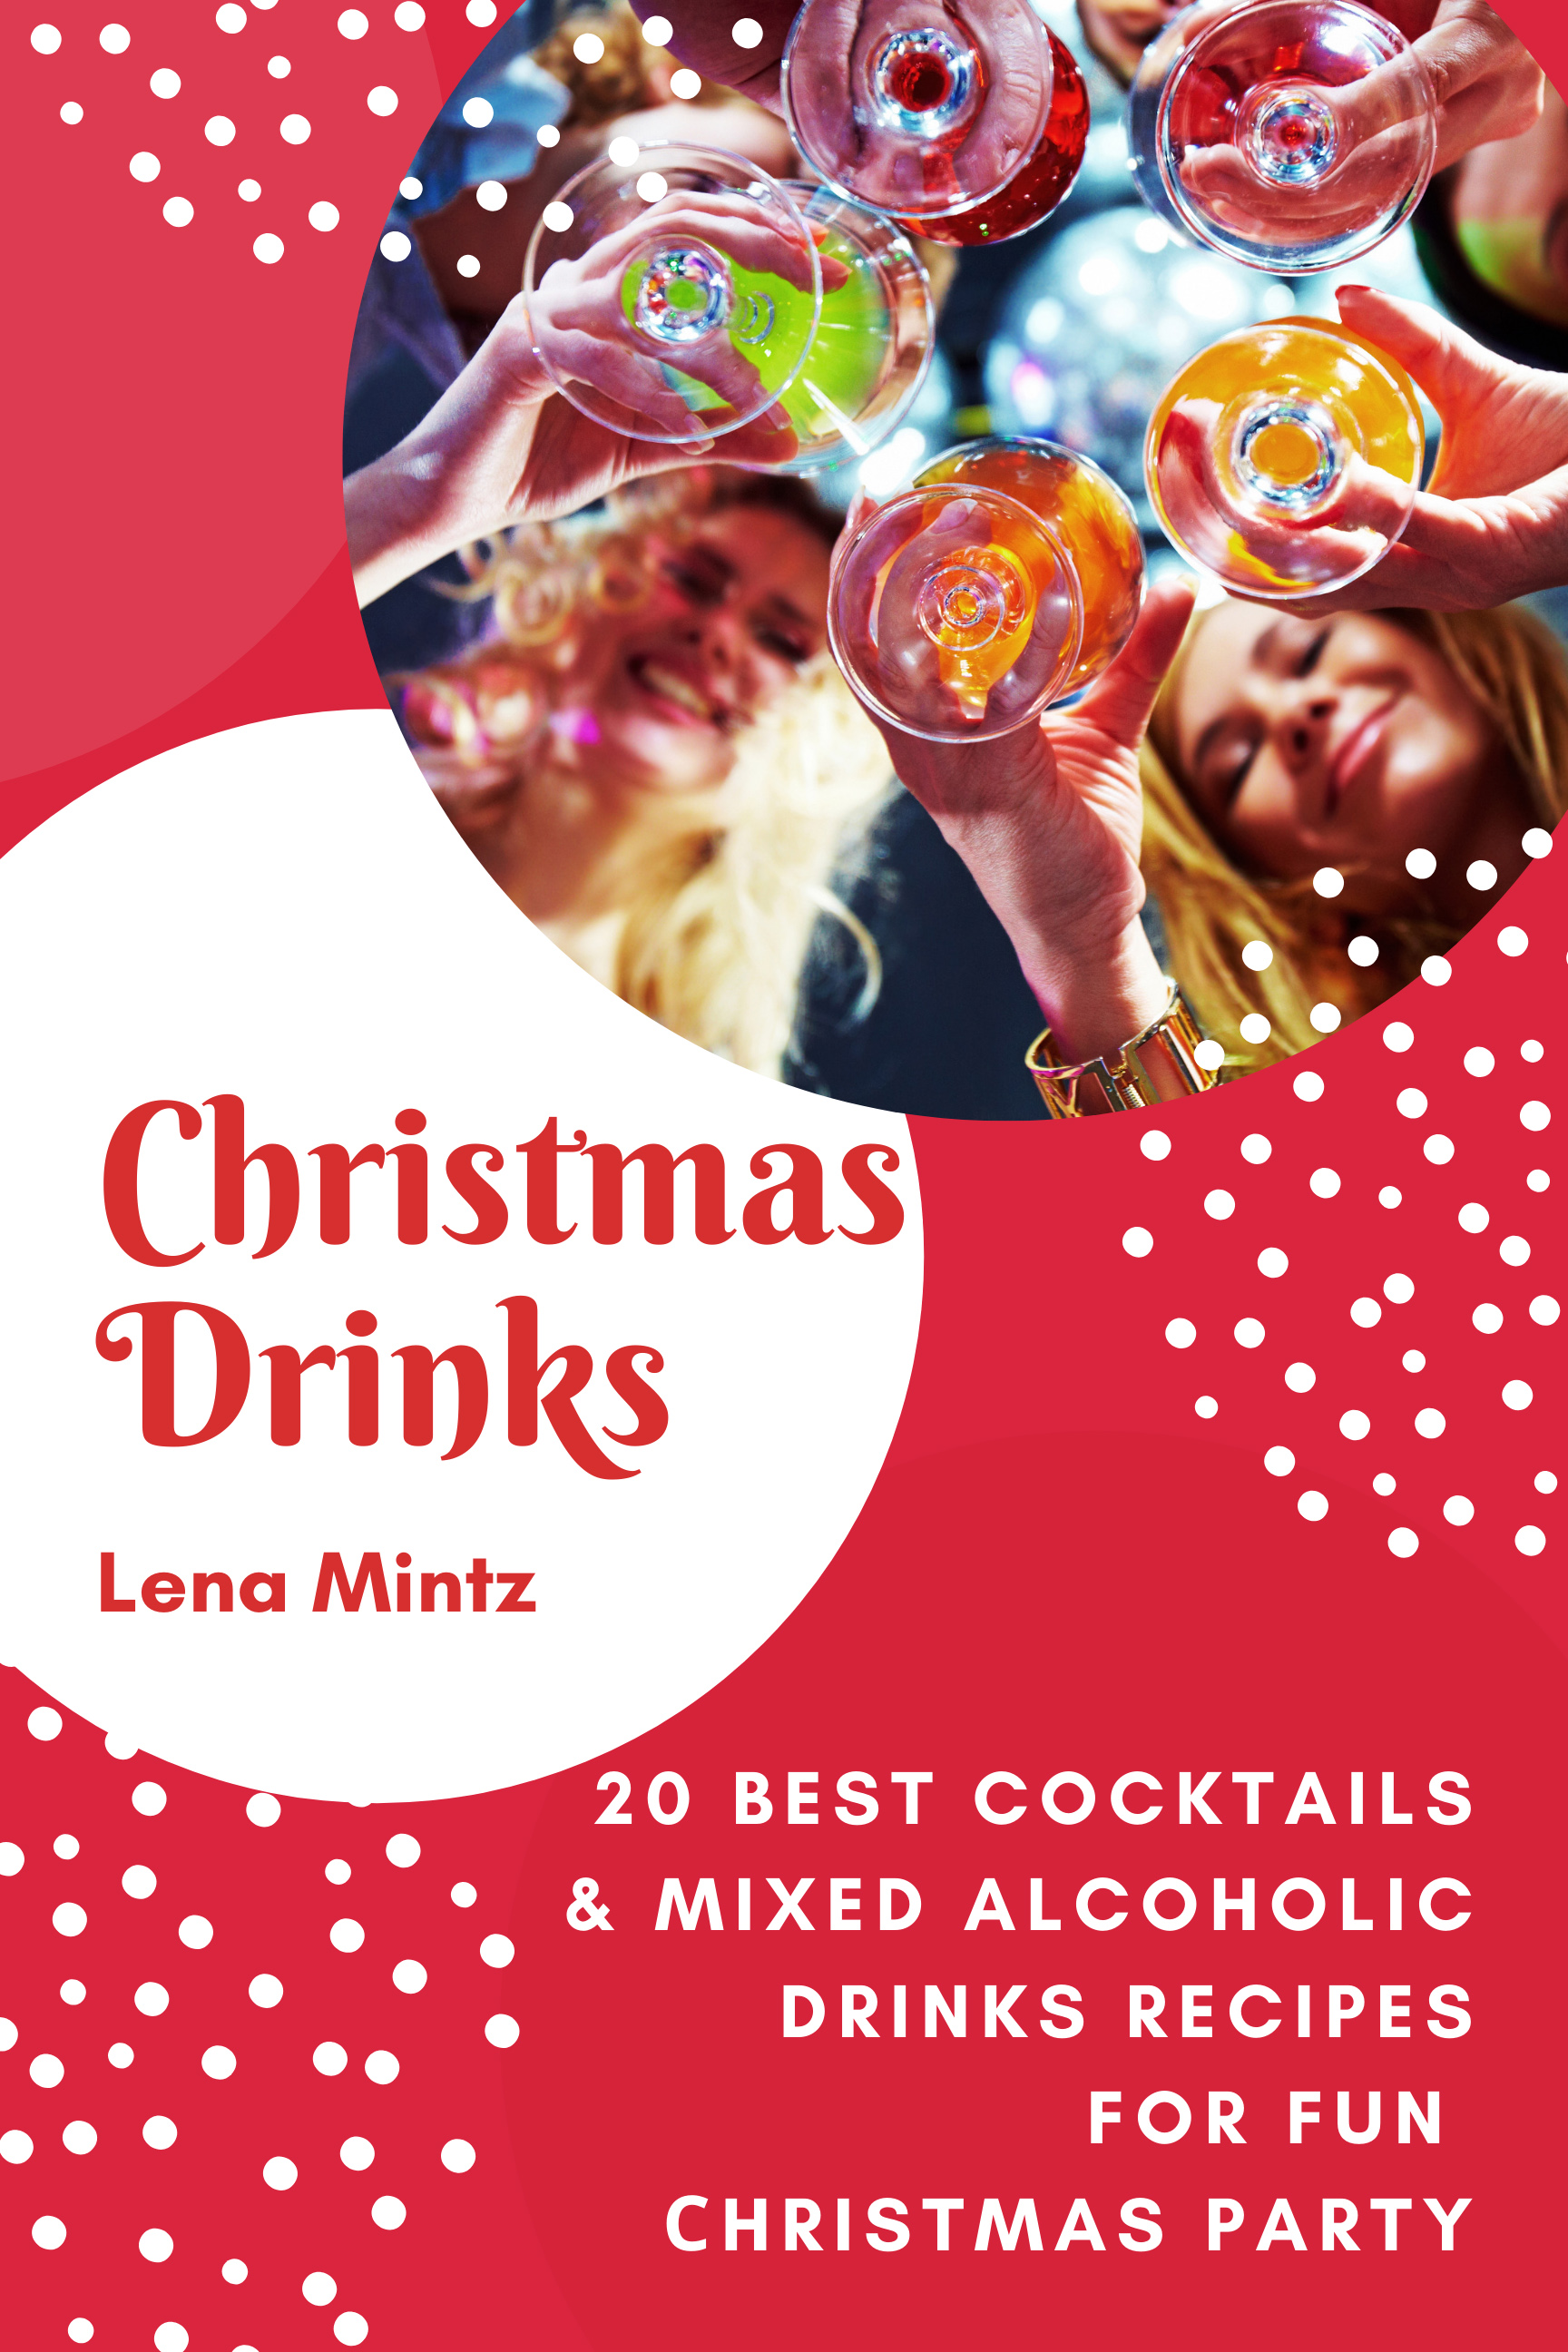 FREE: Сhristmas Drinks. 20 Best Cocktails & Mixed Alcoholic Drinks Recipes for Fun Сhristmas Party by Lena Mintz